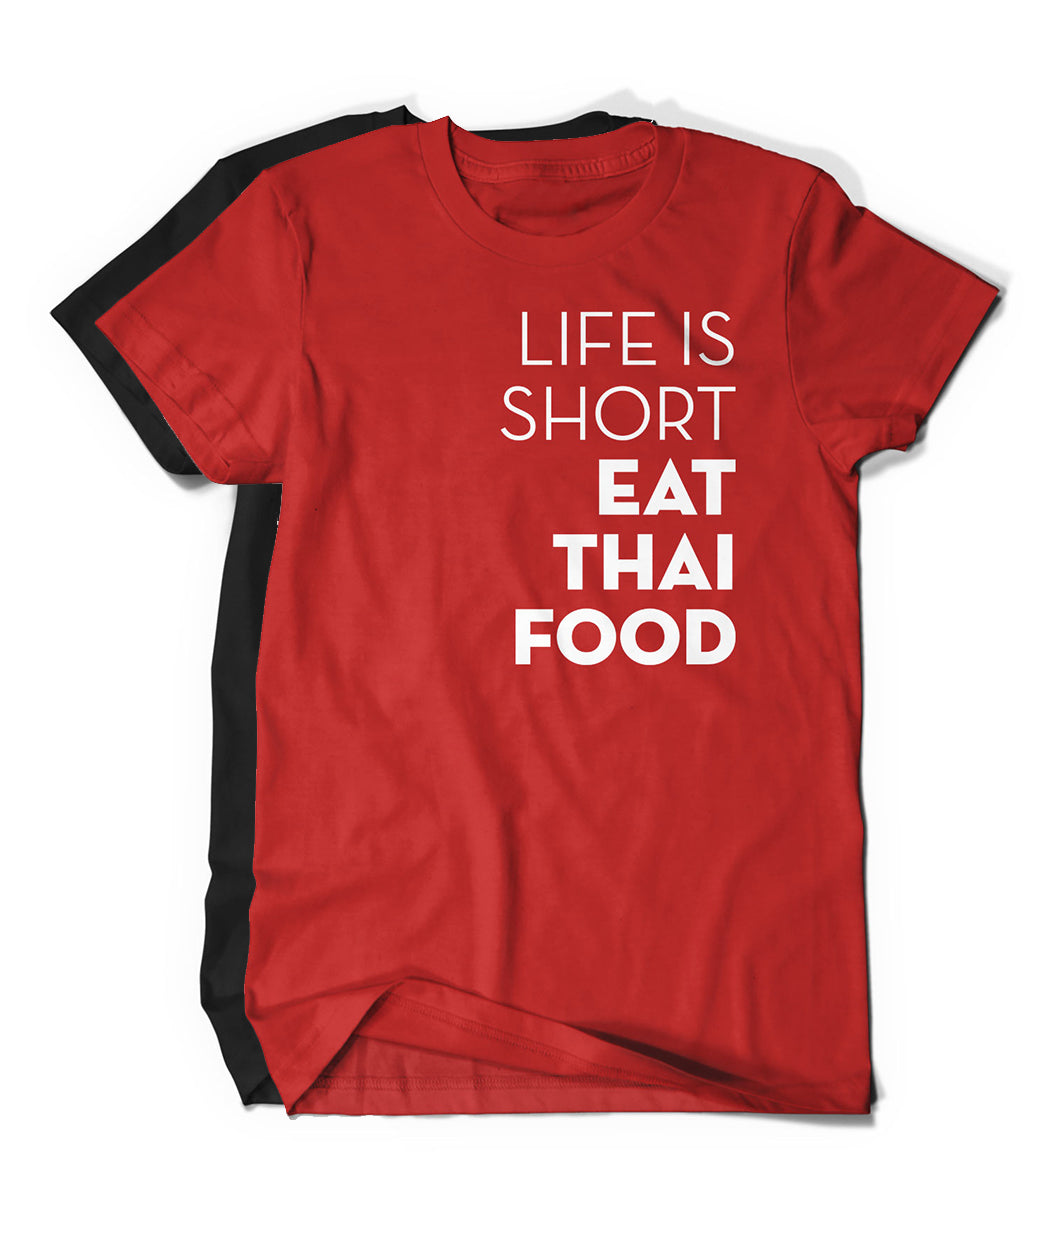 A bright red t-shirt with the words 